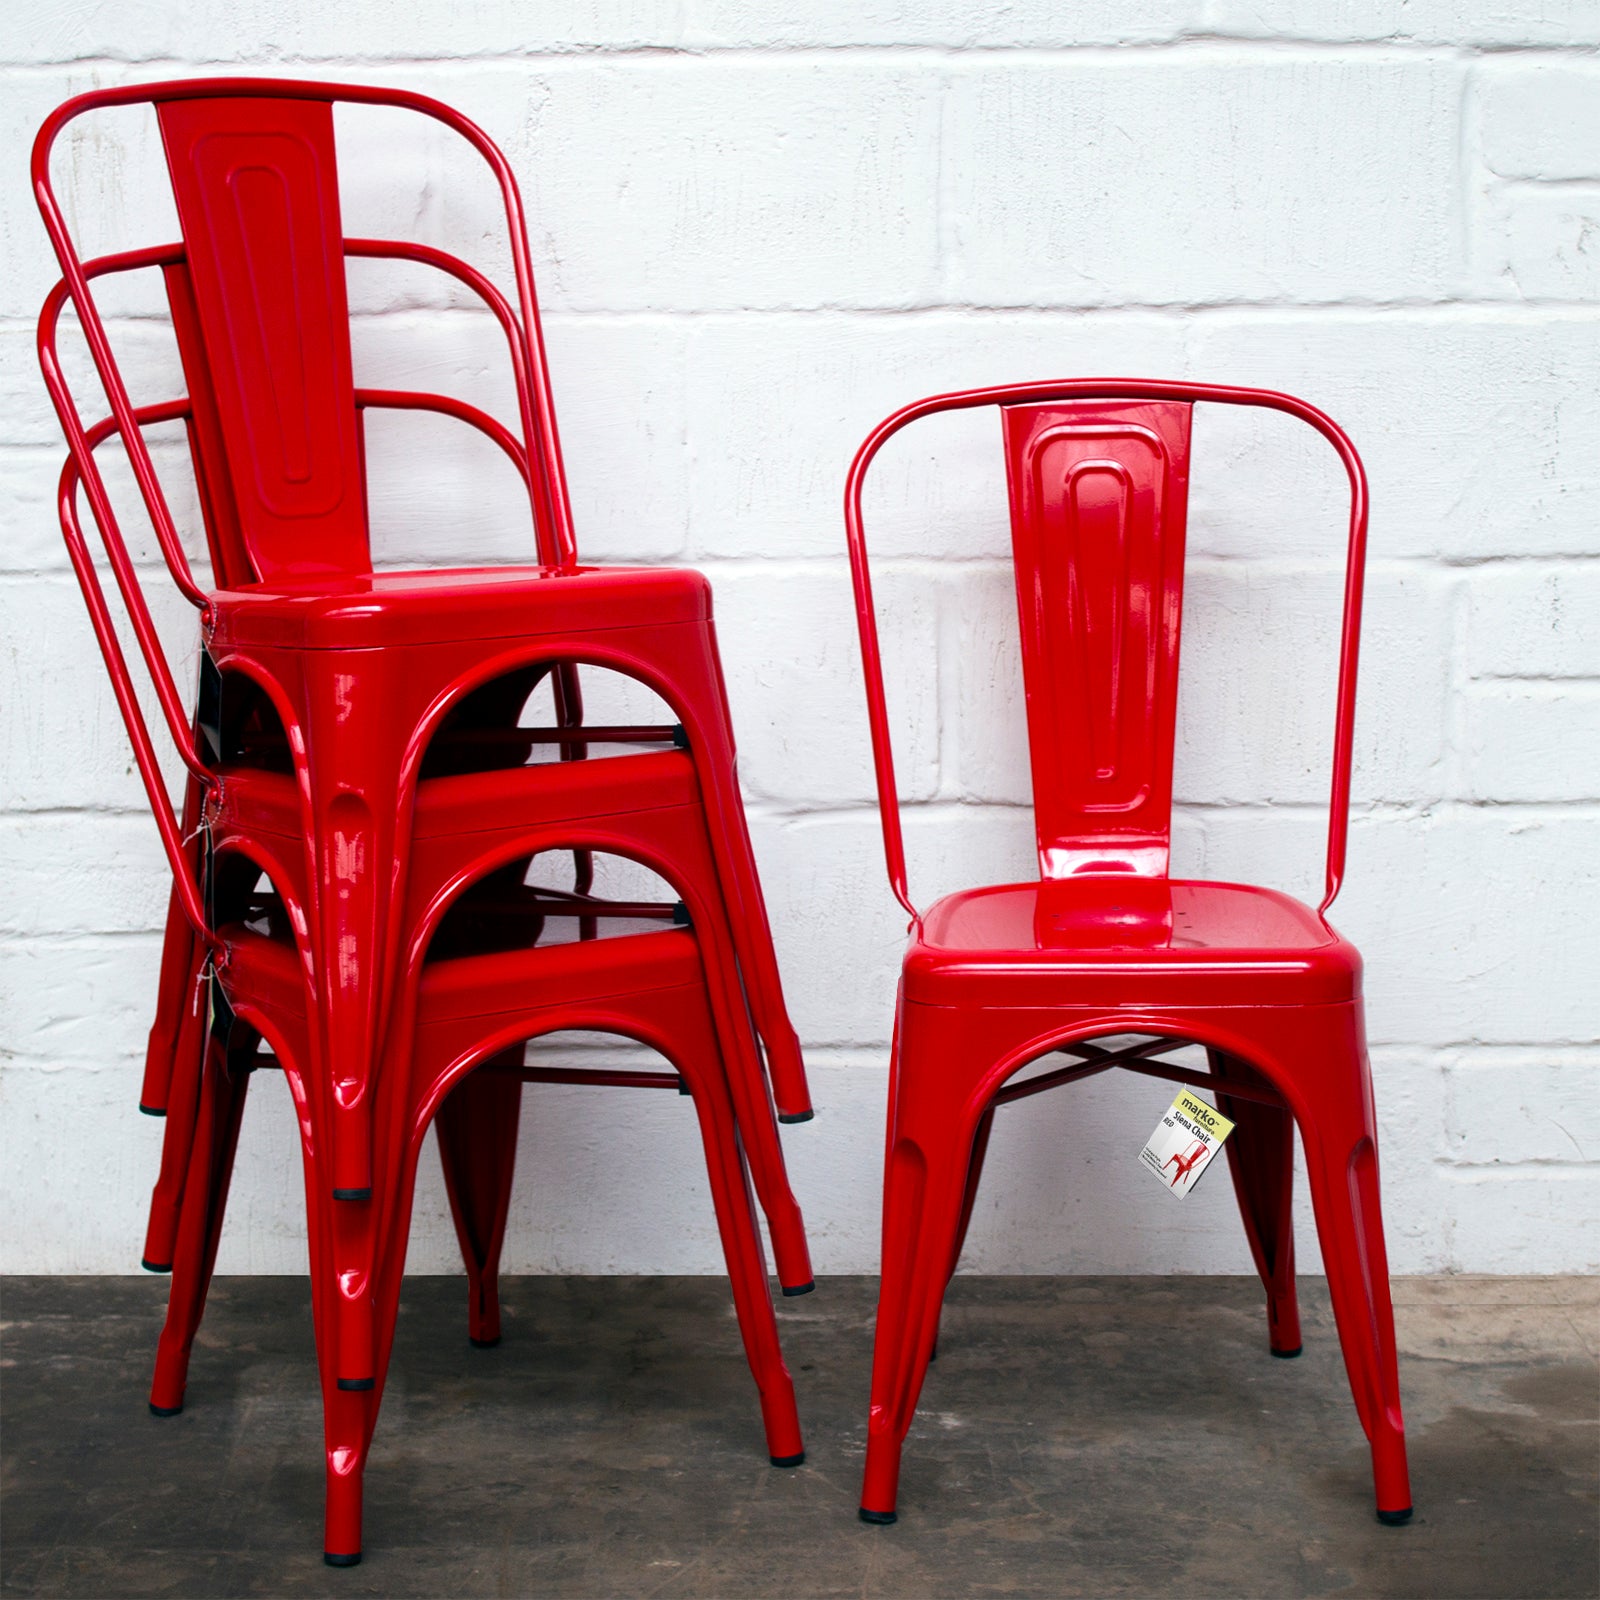 Siena Chairs - Red